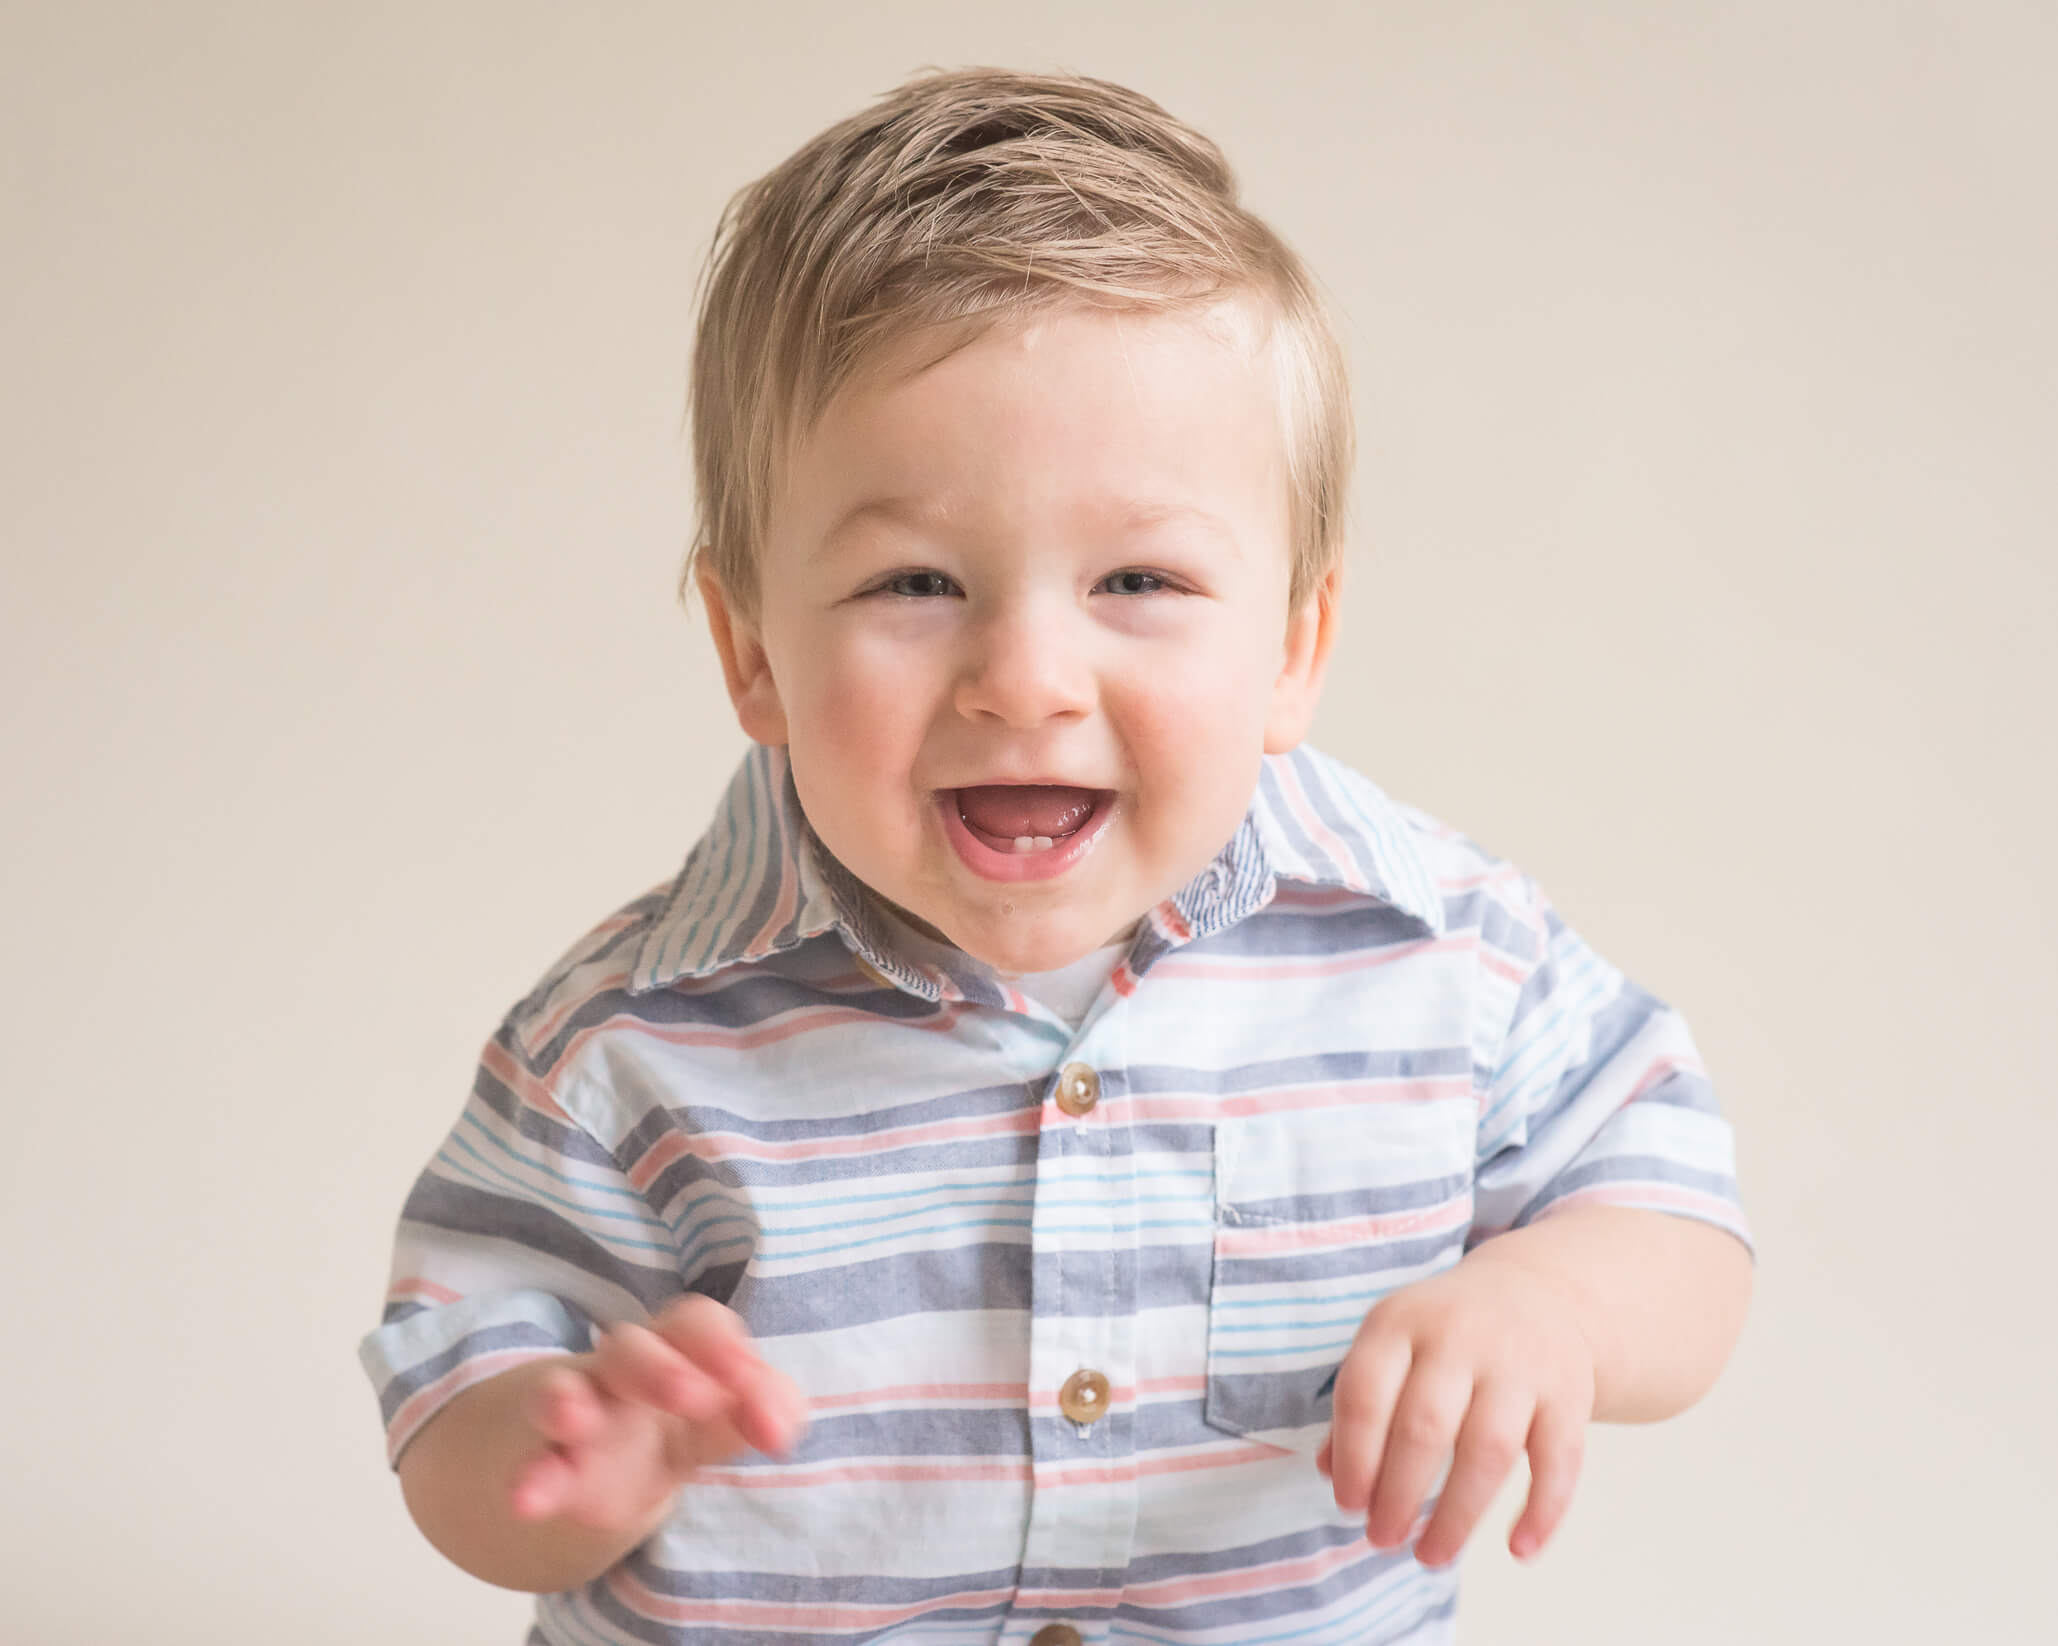 adorable toddler in studio portrait wearing striped shirt